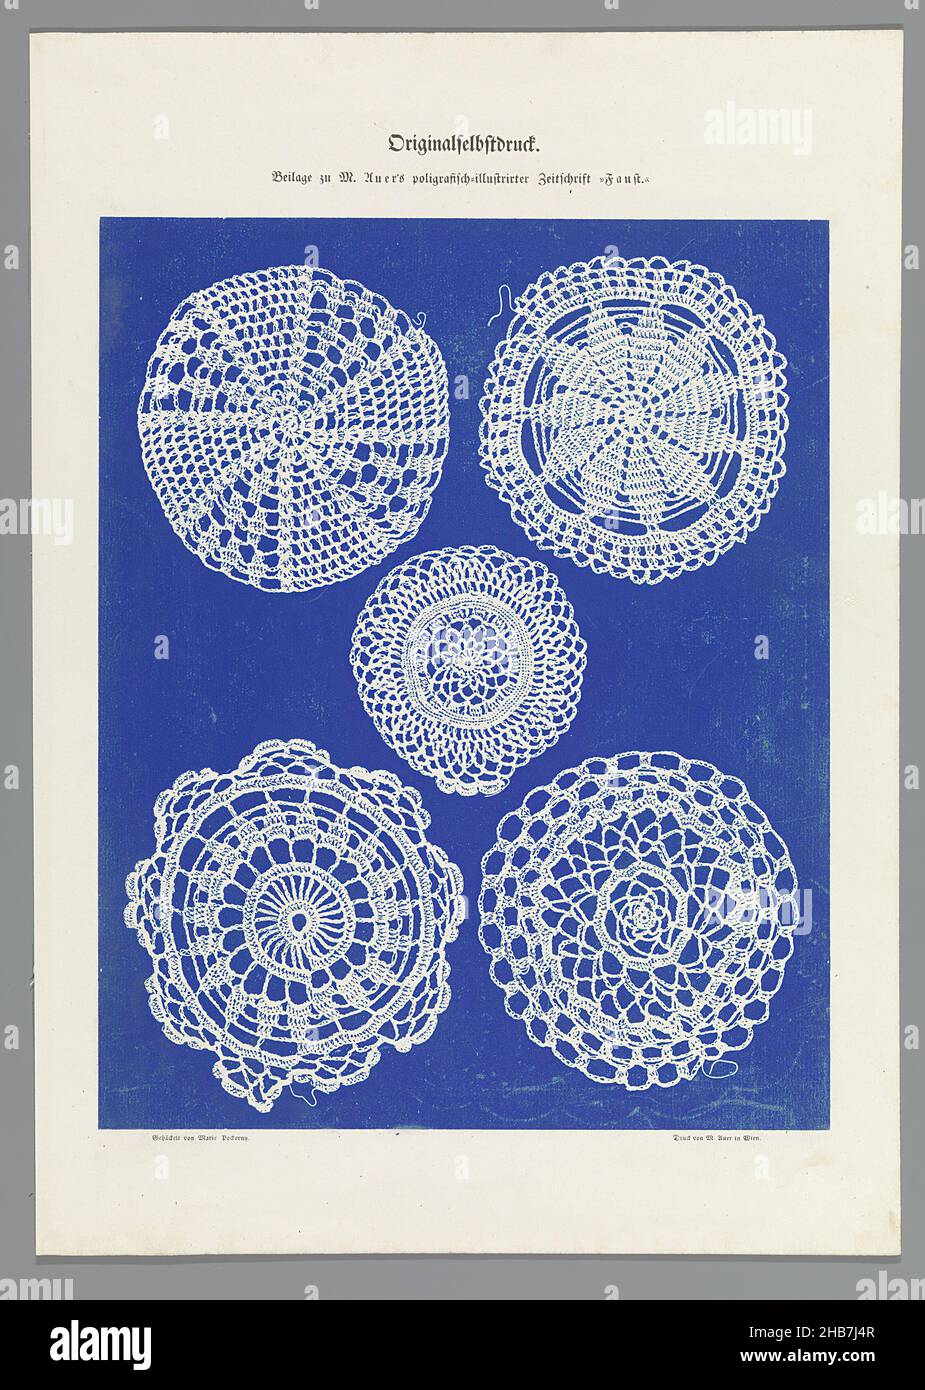 Five lace patterns, Sheet from series of 12 Naturselbstdrucke Auer., maker: Alois Auer, (mentioned on object), Vienna, 1855, paper, height 343 mm × width 243 mm Stock Photo